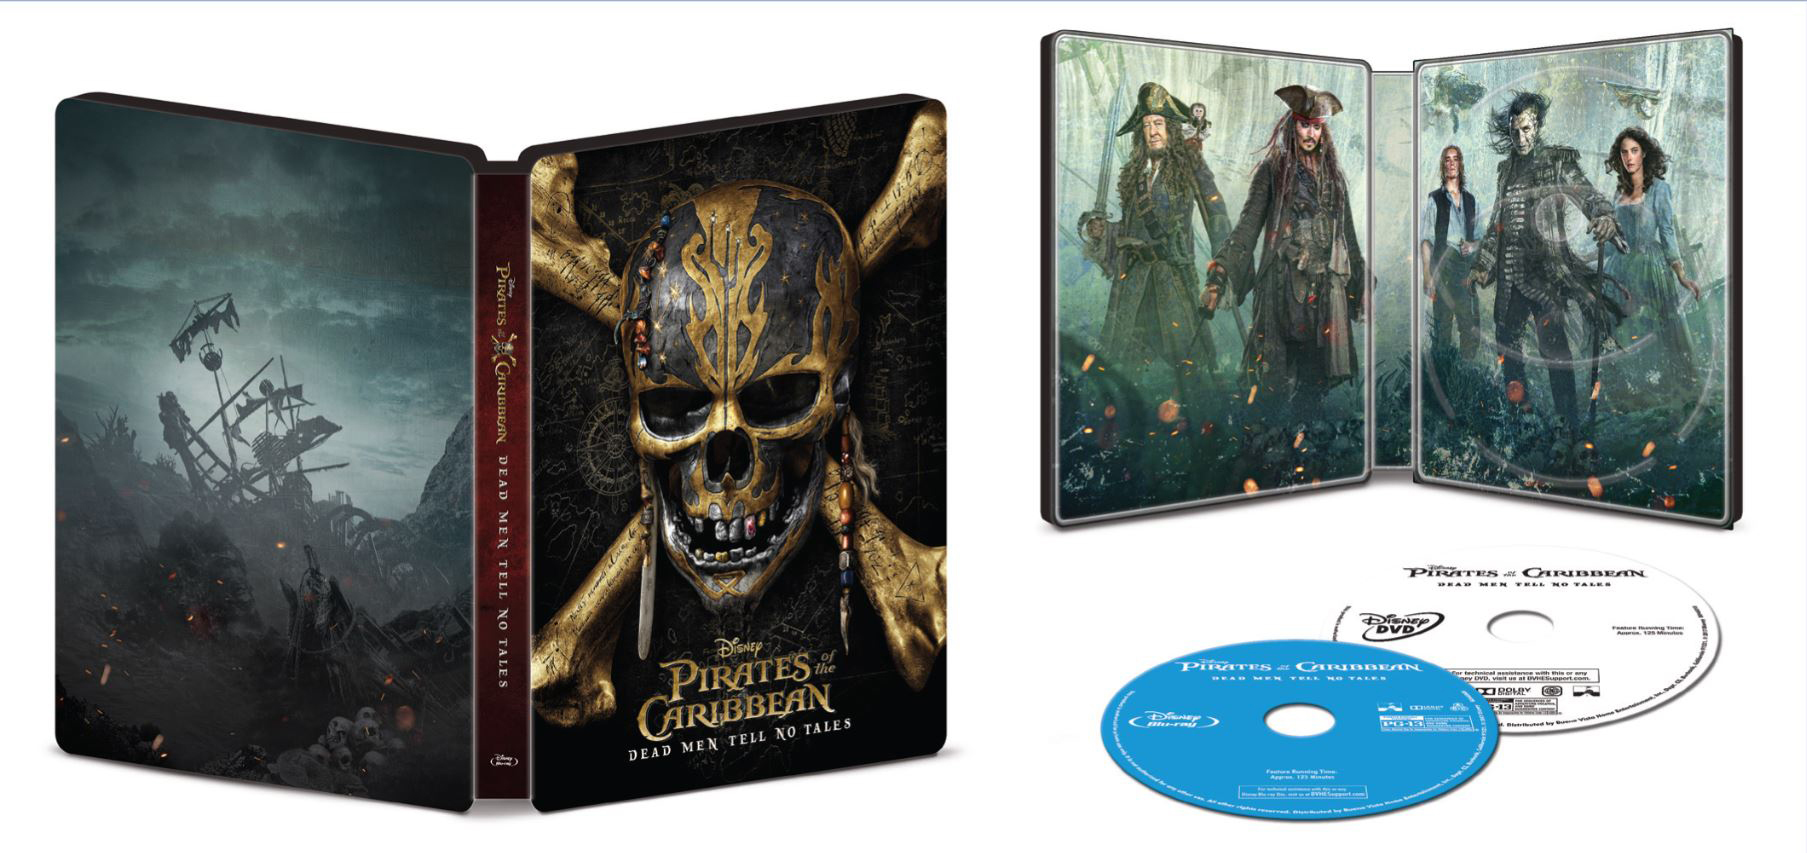 Pirates Of The Caribbean Dead Men Tell No Tales Steelbook Blu Raydvd Only At Best Buy 2017